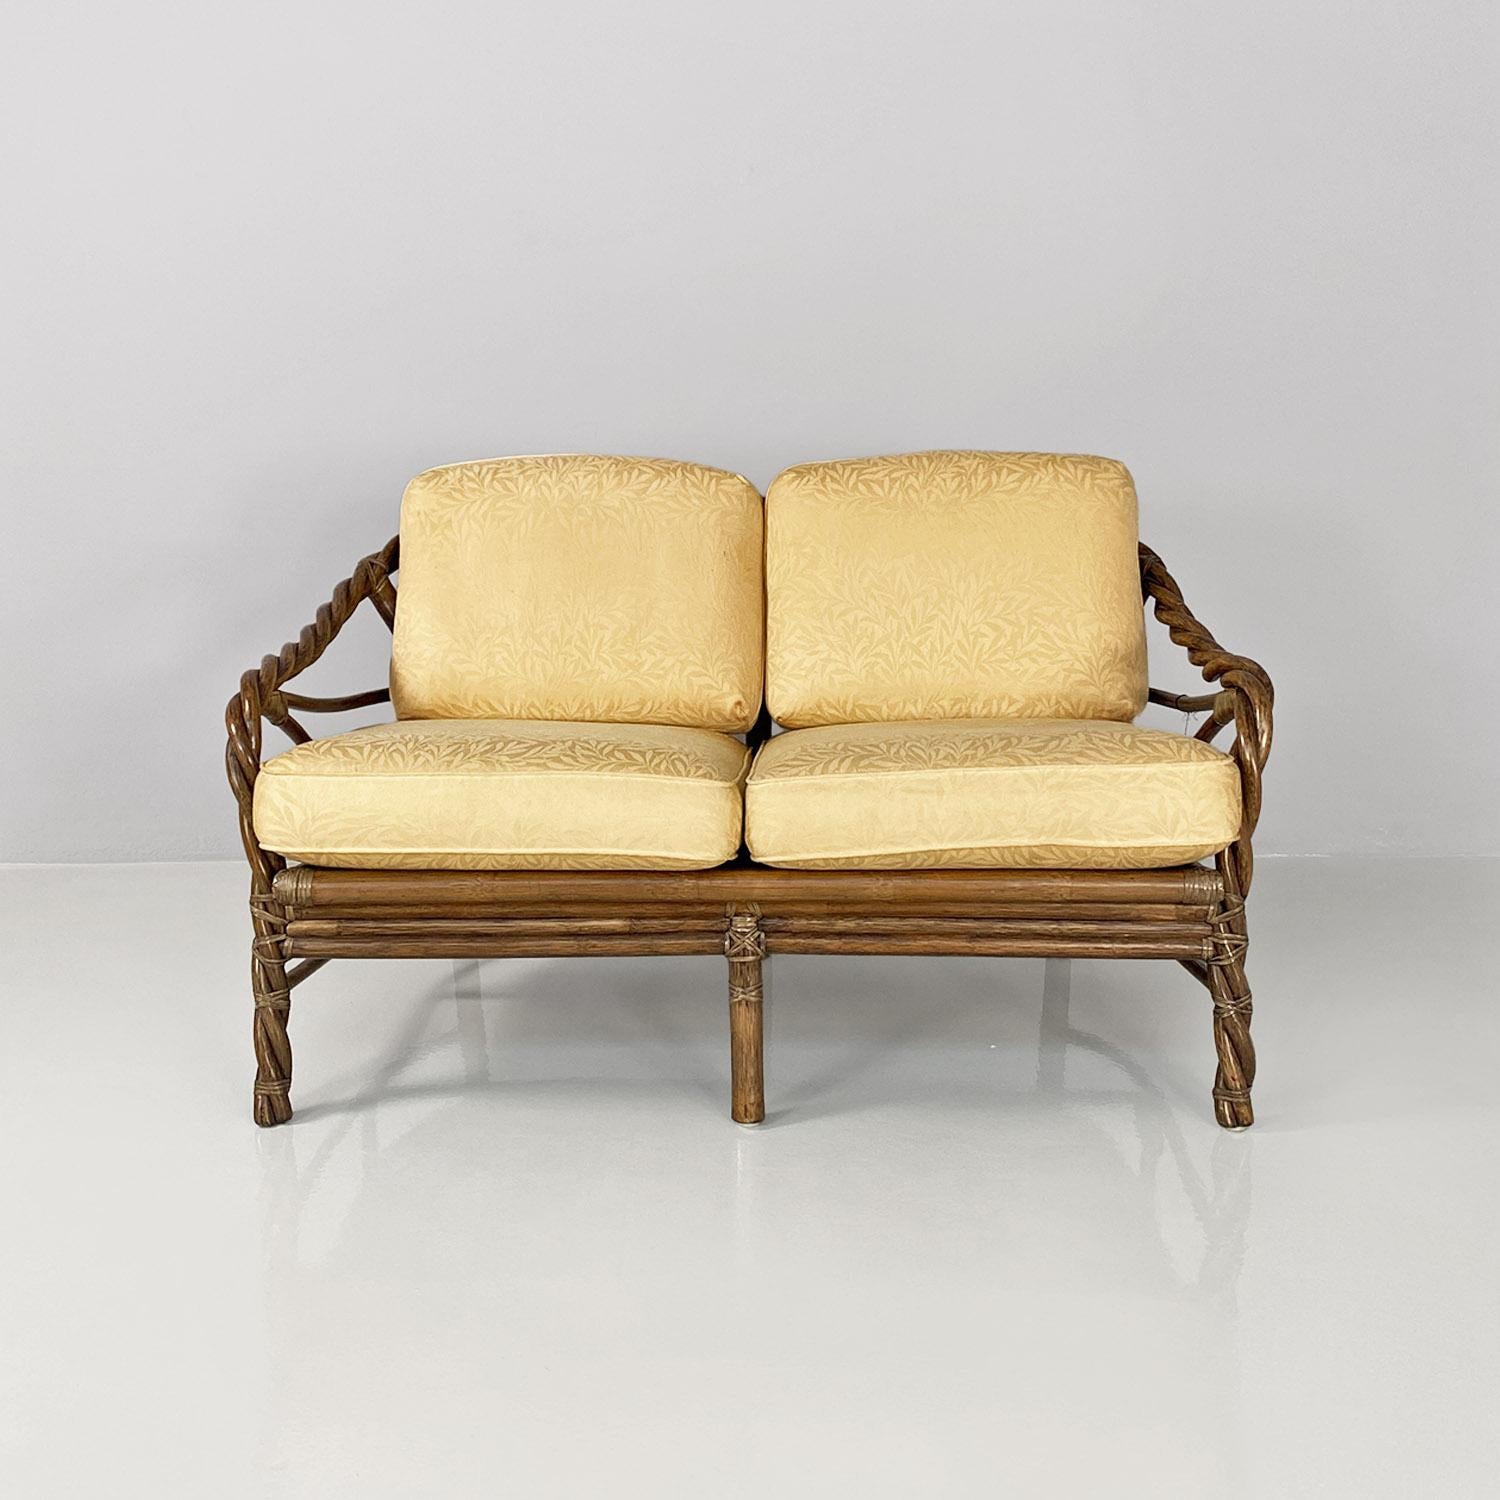 American modern rattan and beige floreal fabric sofa by McGuire Company, 1970s.
Two-seater sofa with rectangular seat in woven rattan with leather laces, with armrests, also in woven rattan. On the seat, as on the backrest, there are two padded